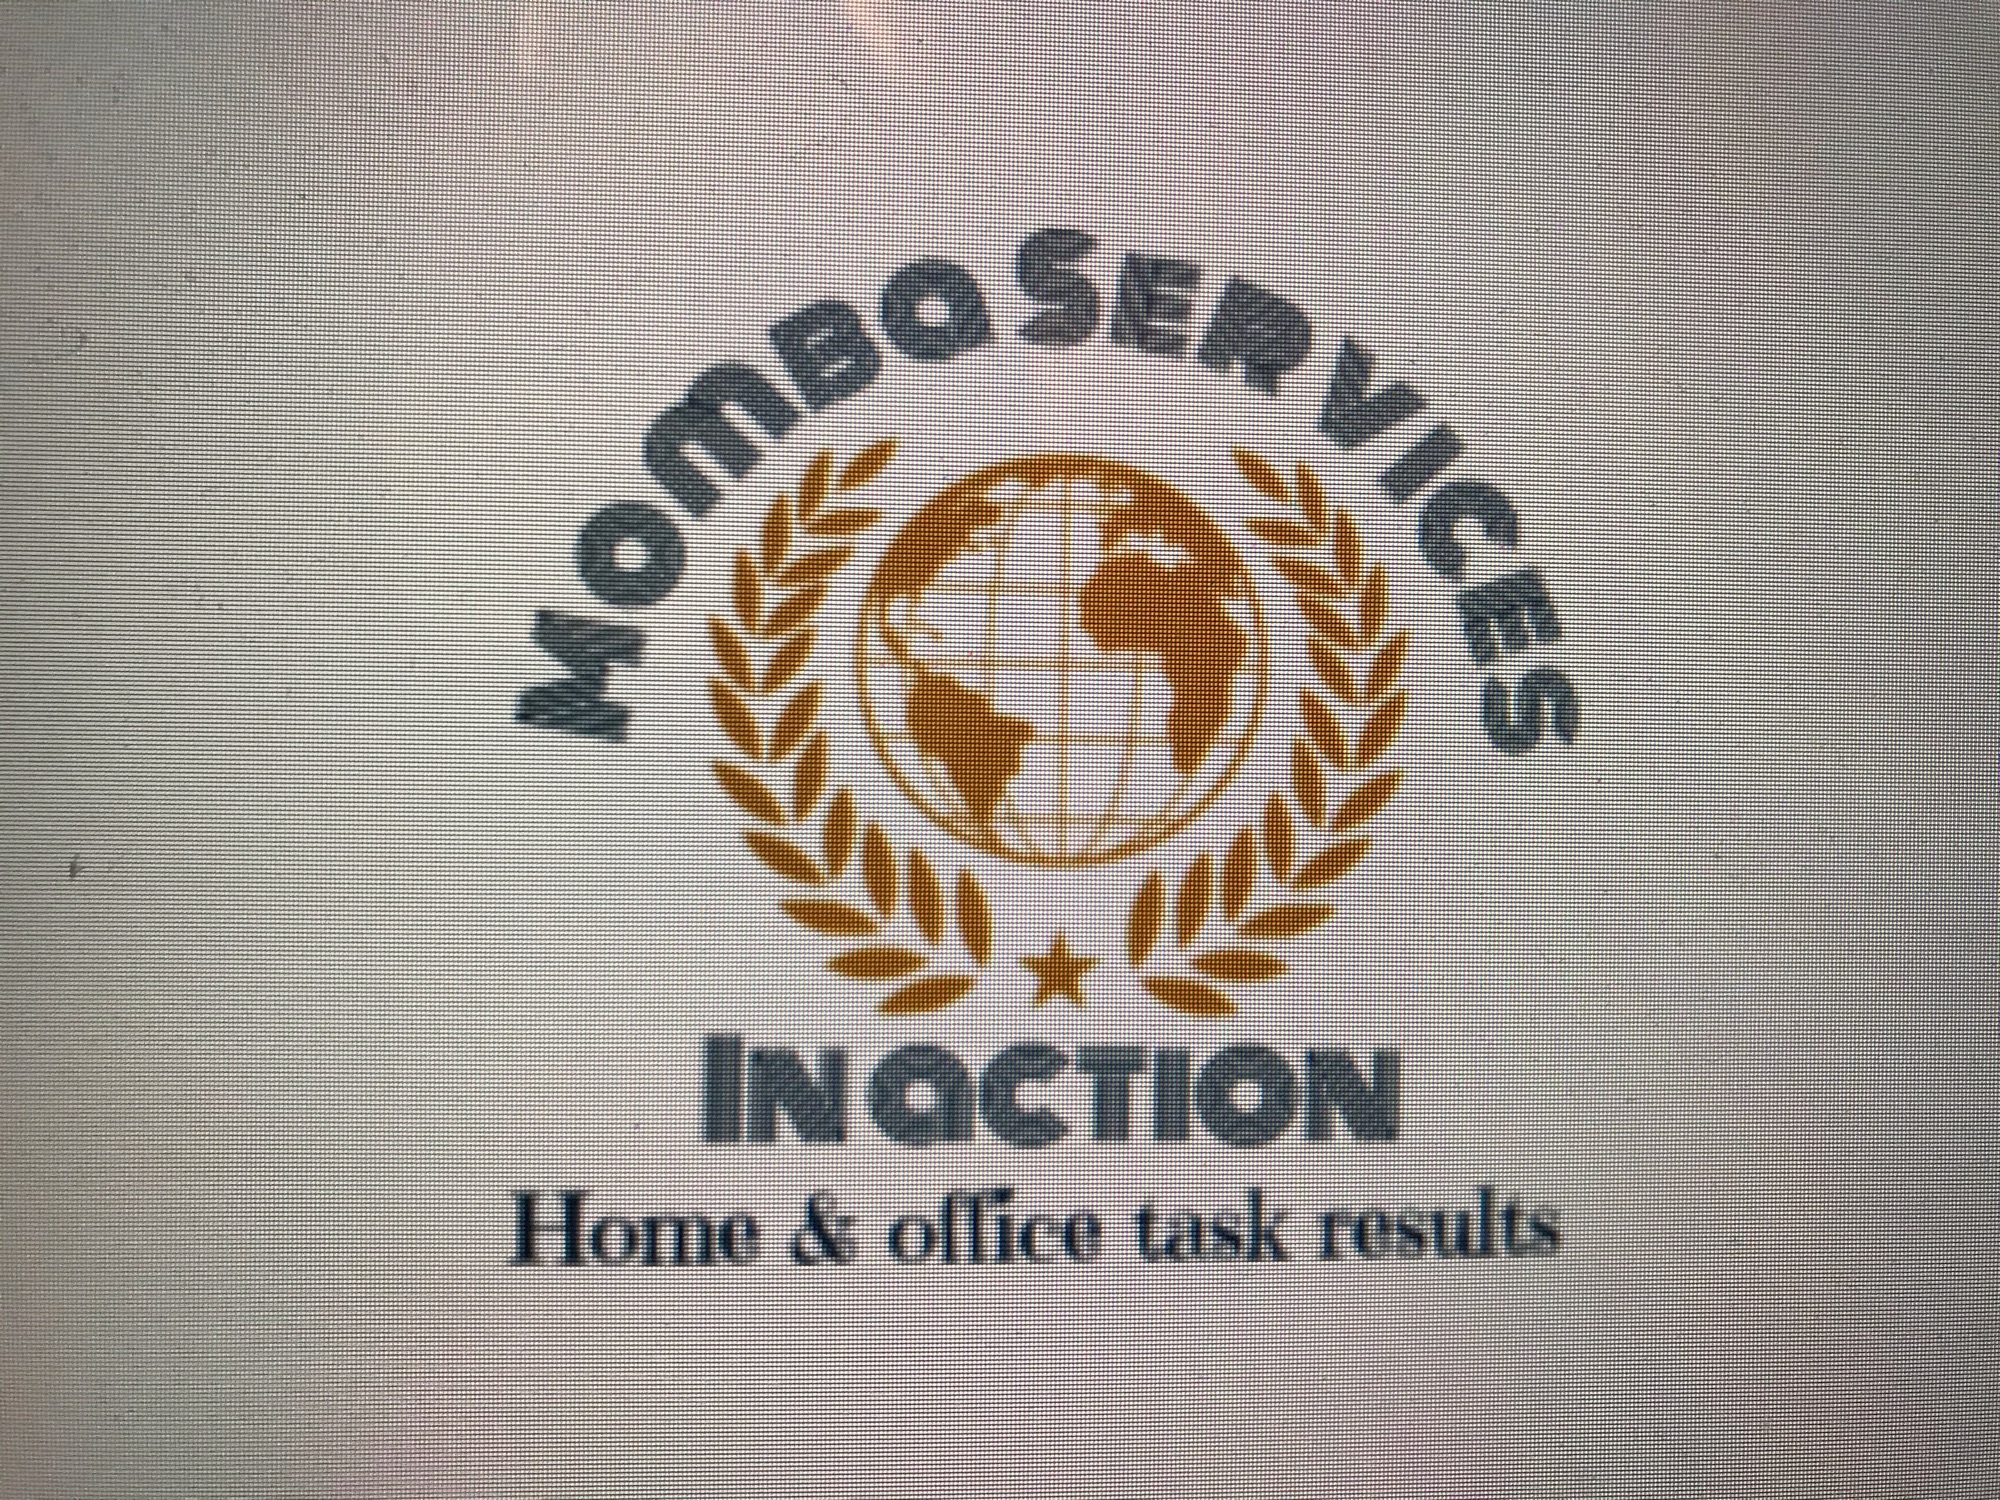 Momba Services in Action Logo